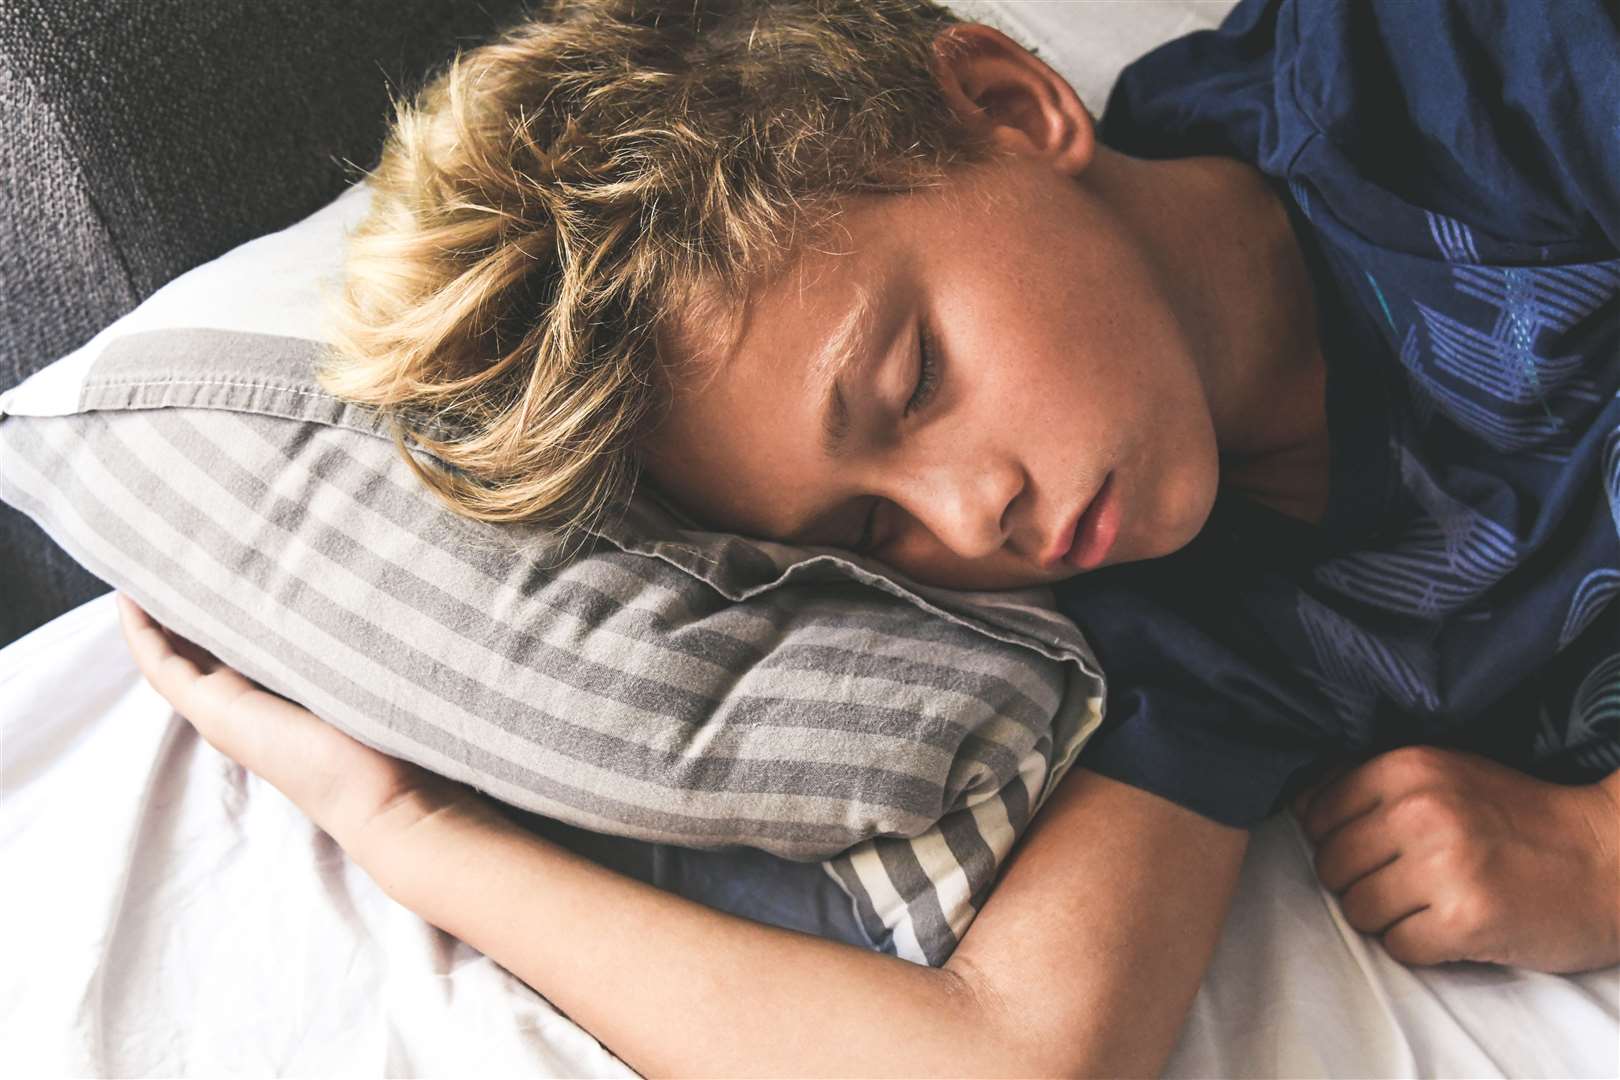 Paying attention to clothing and bedding can help children feel cooler at bedtime